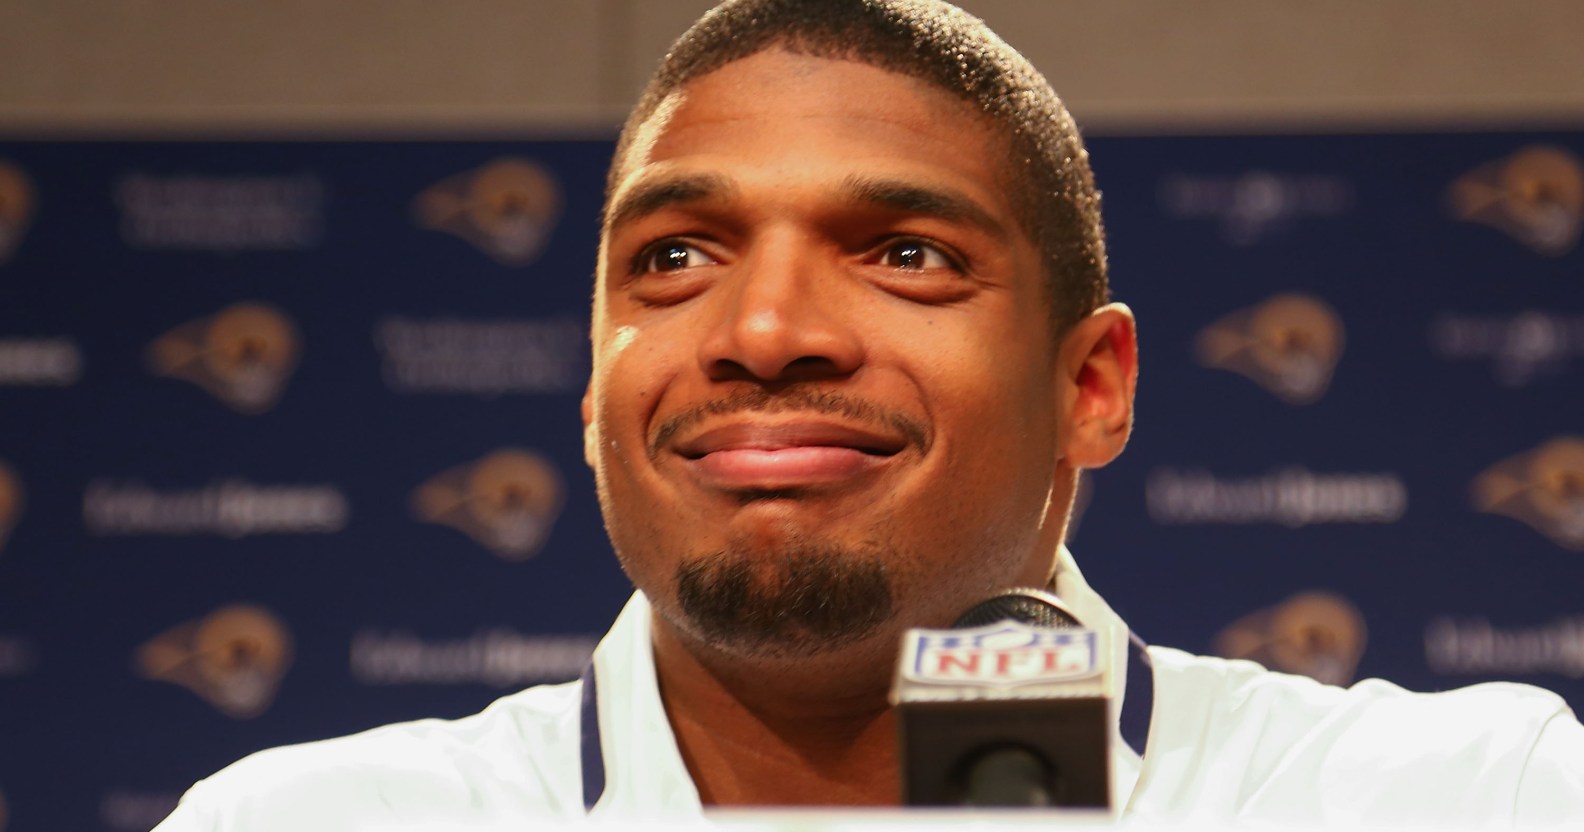 St. Louis Rams draft pick Michael Sam addresses the media after becoming the first openly gay football player to be drafter in the NFL.